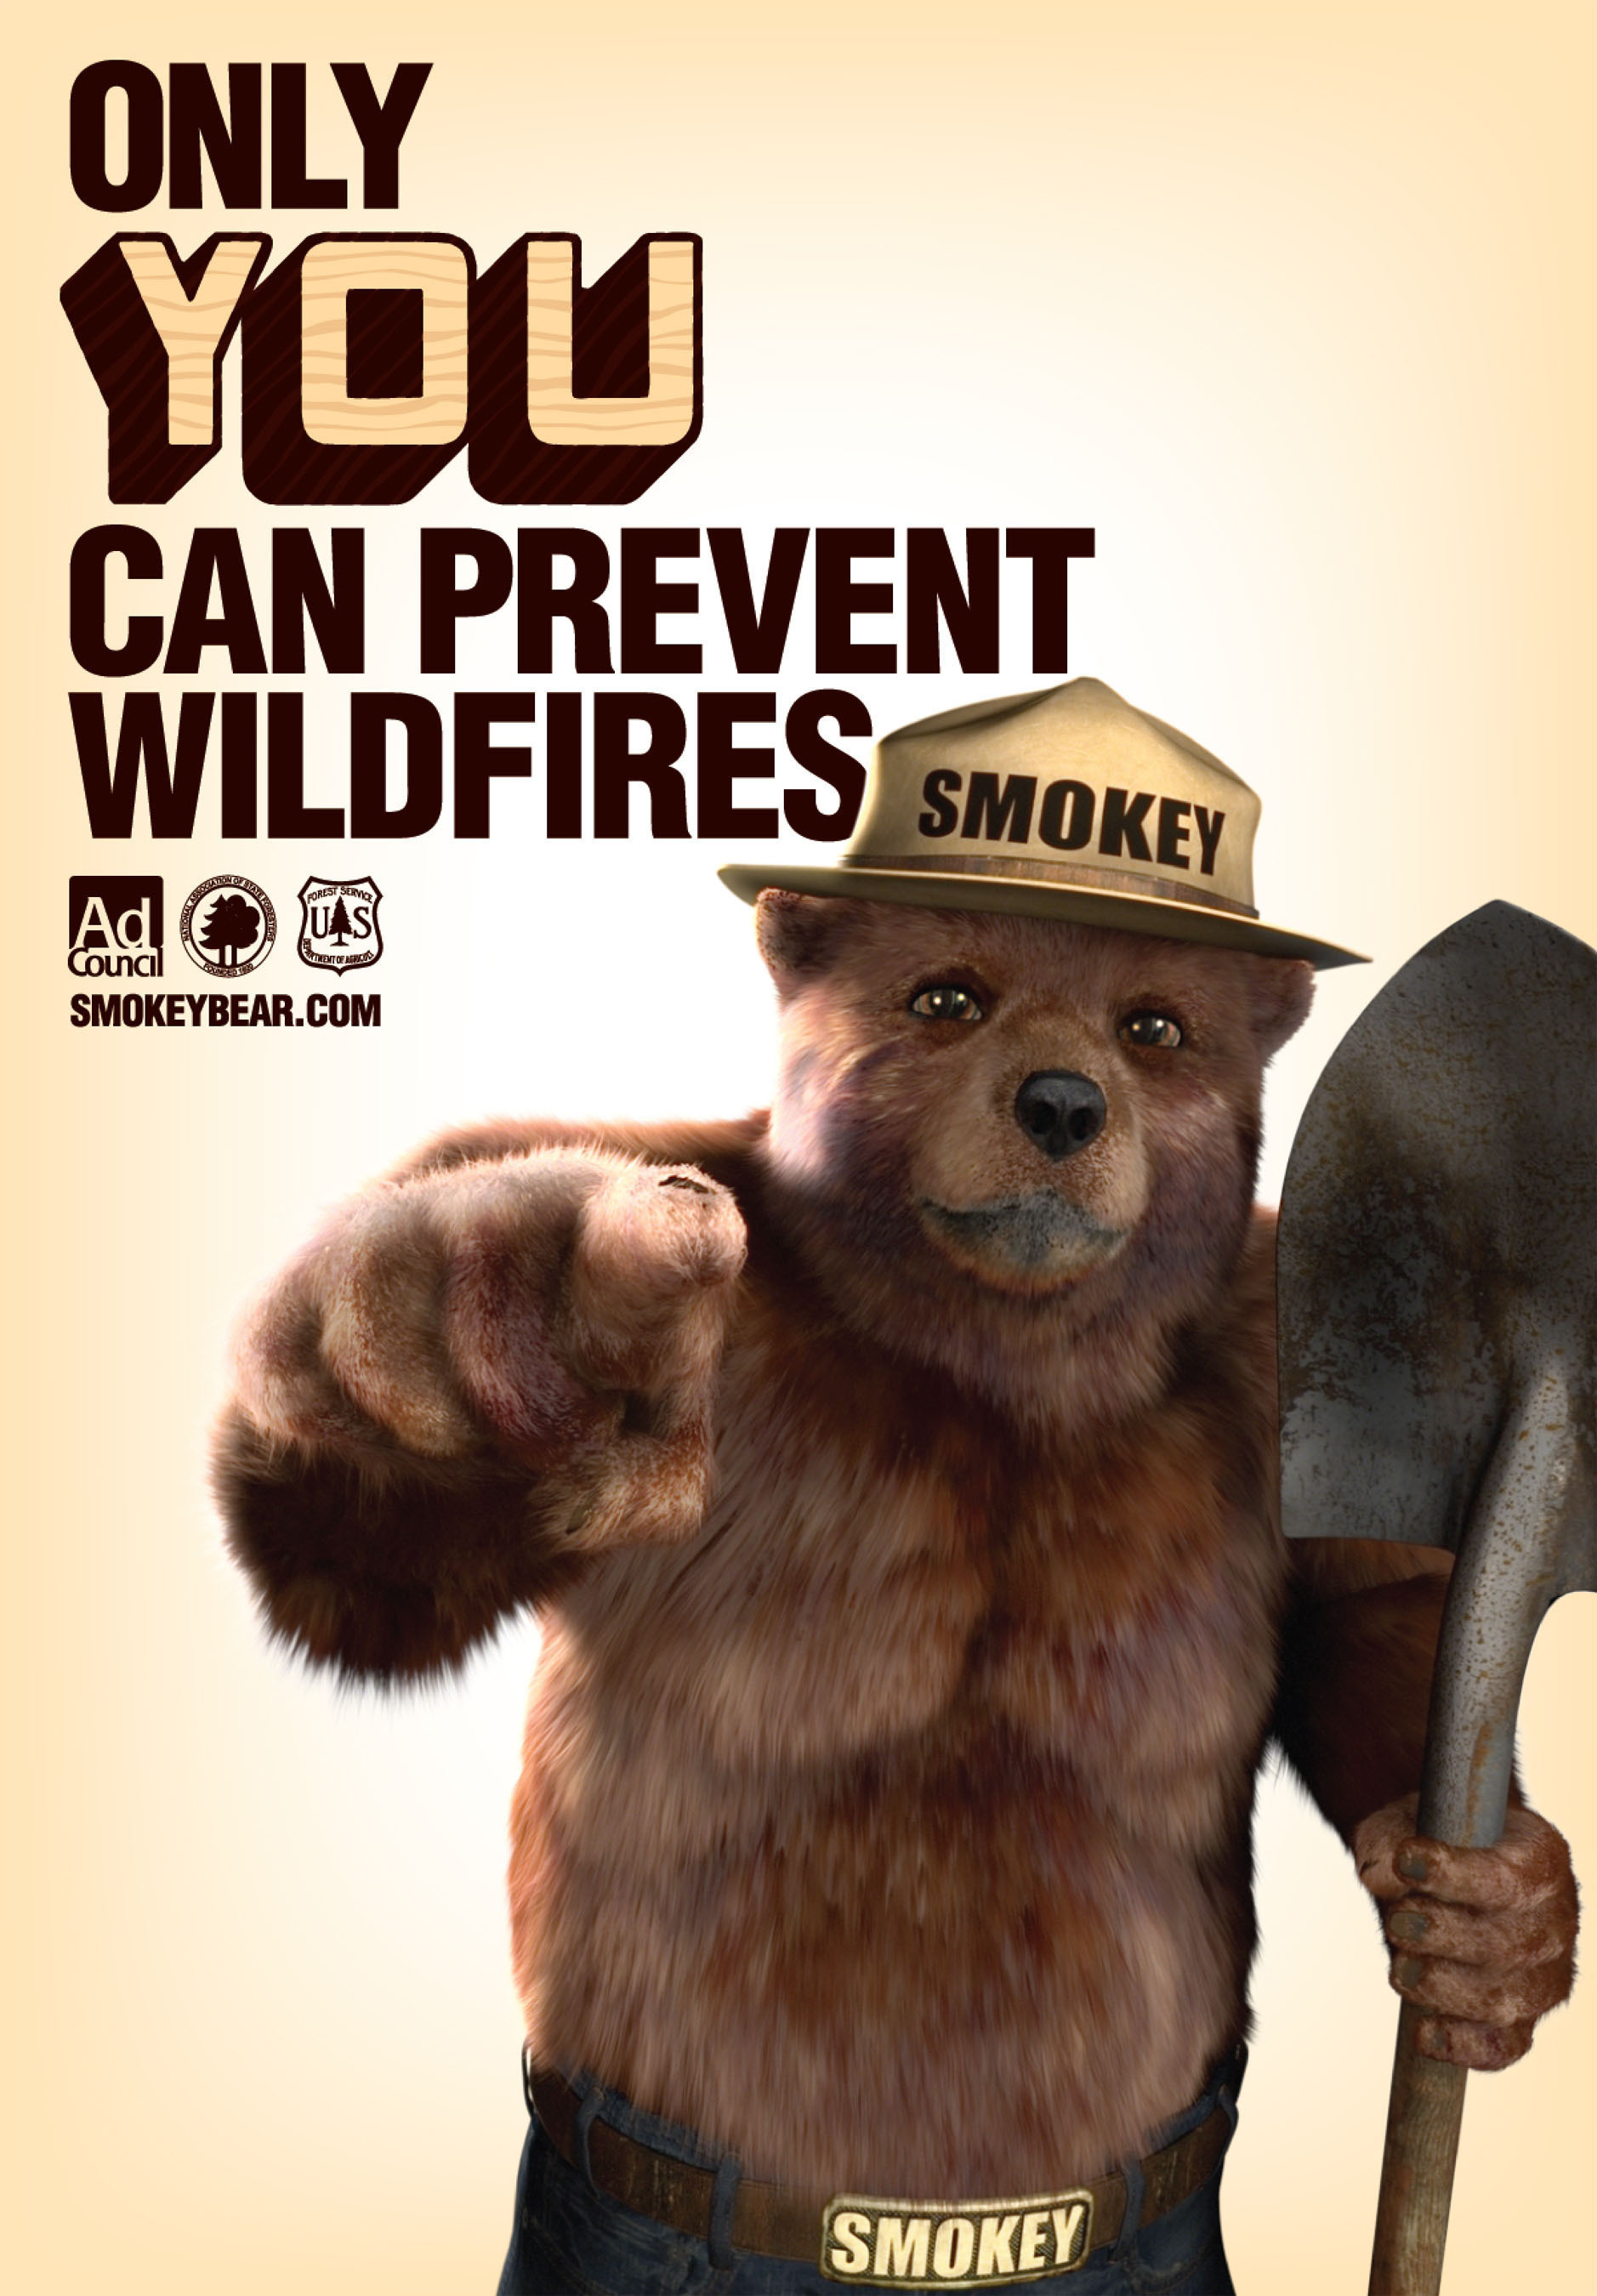 Smokey Bear Returns to Remind Americans. Only You Can Prevent Wildfires